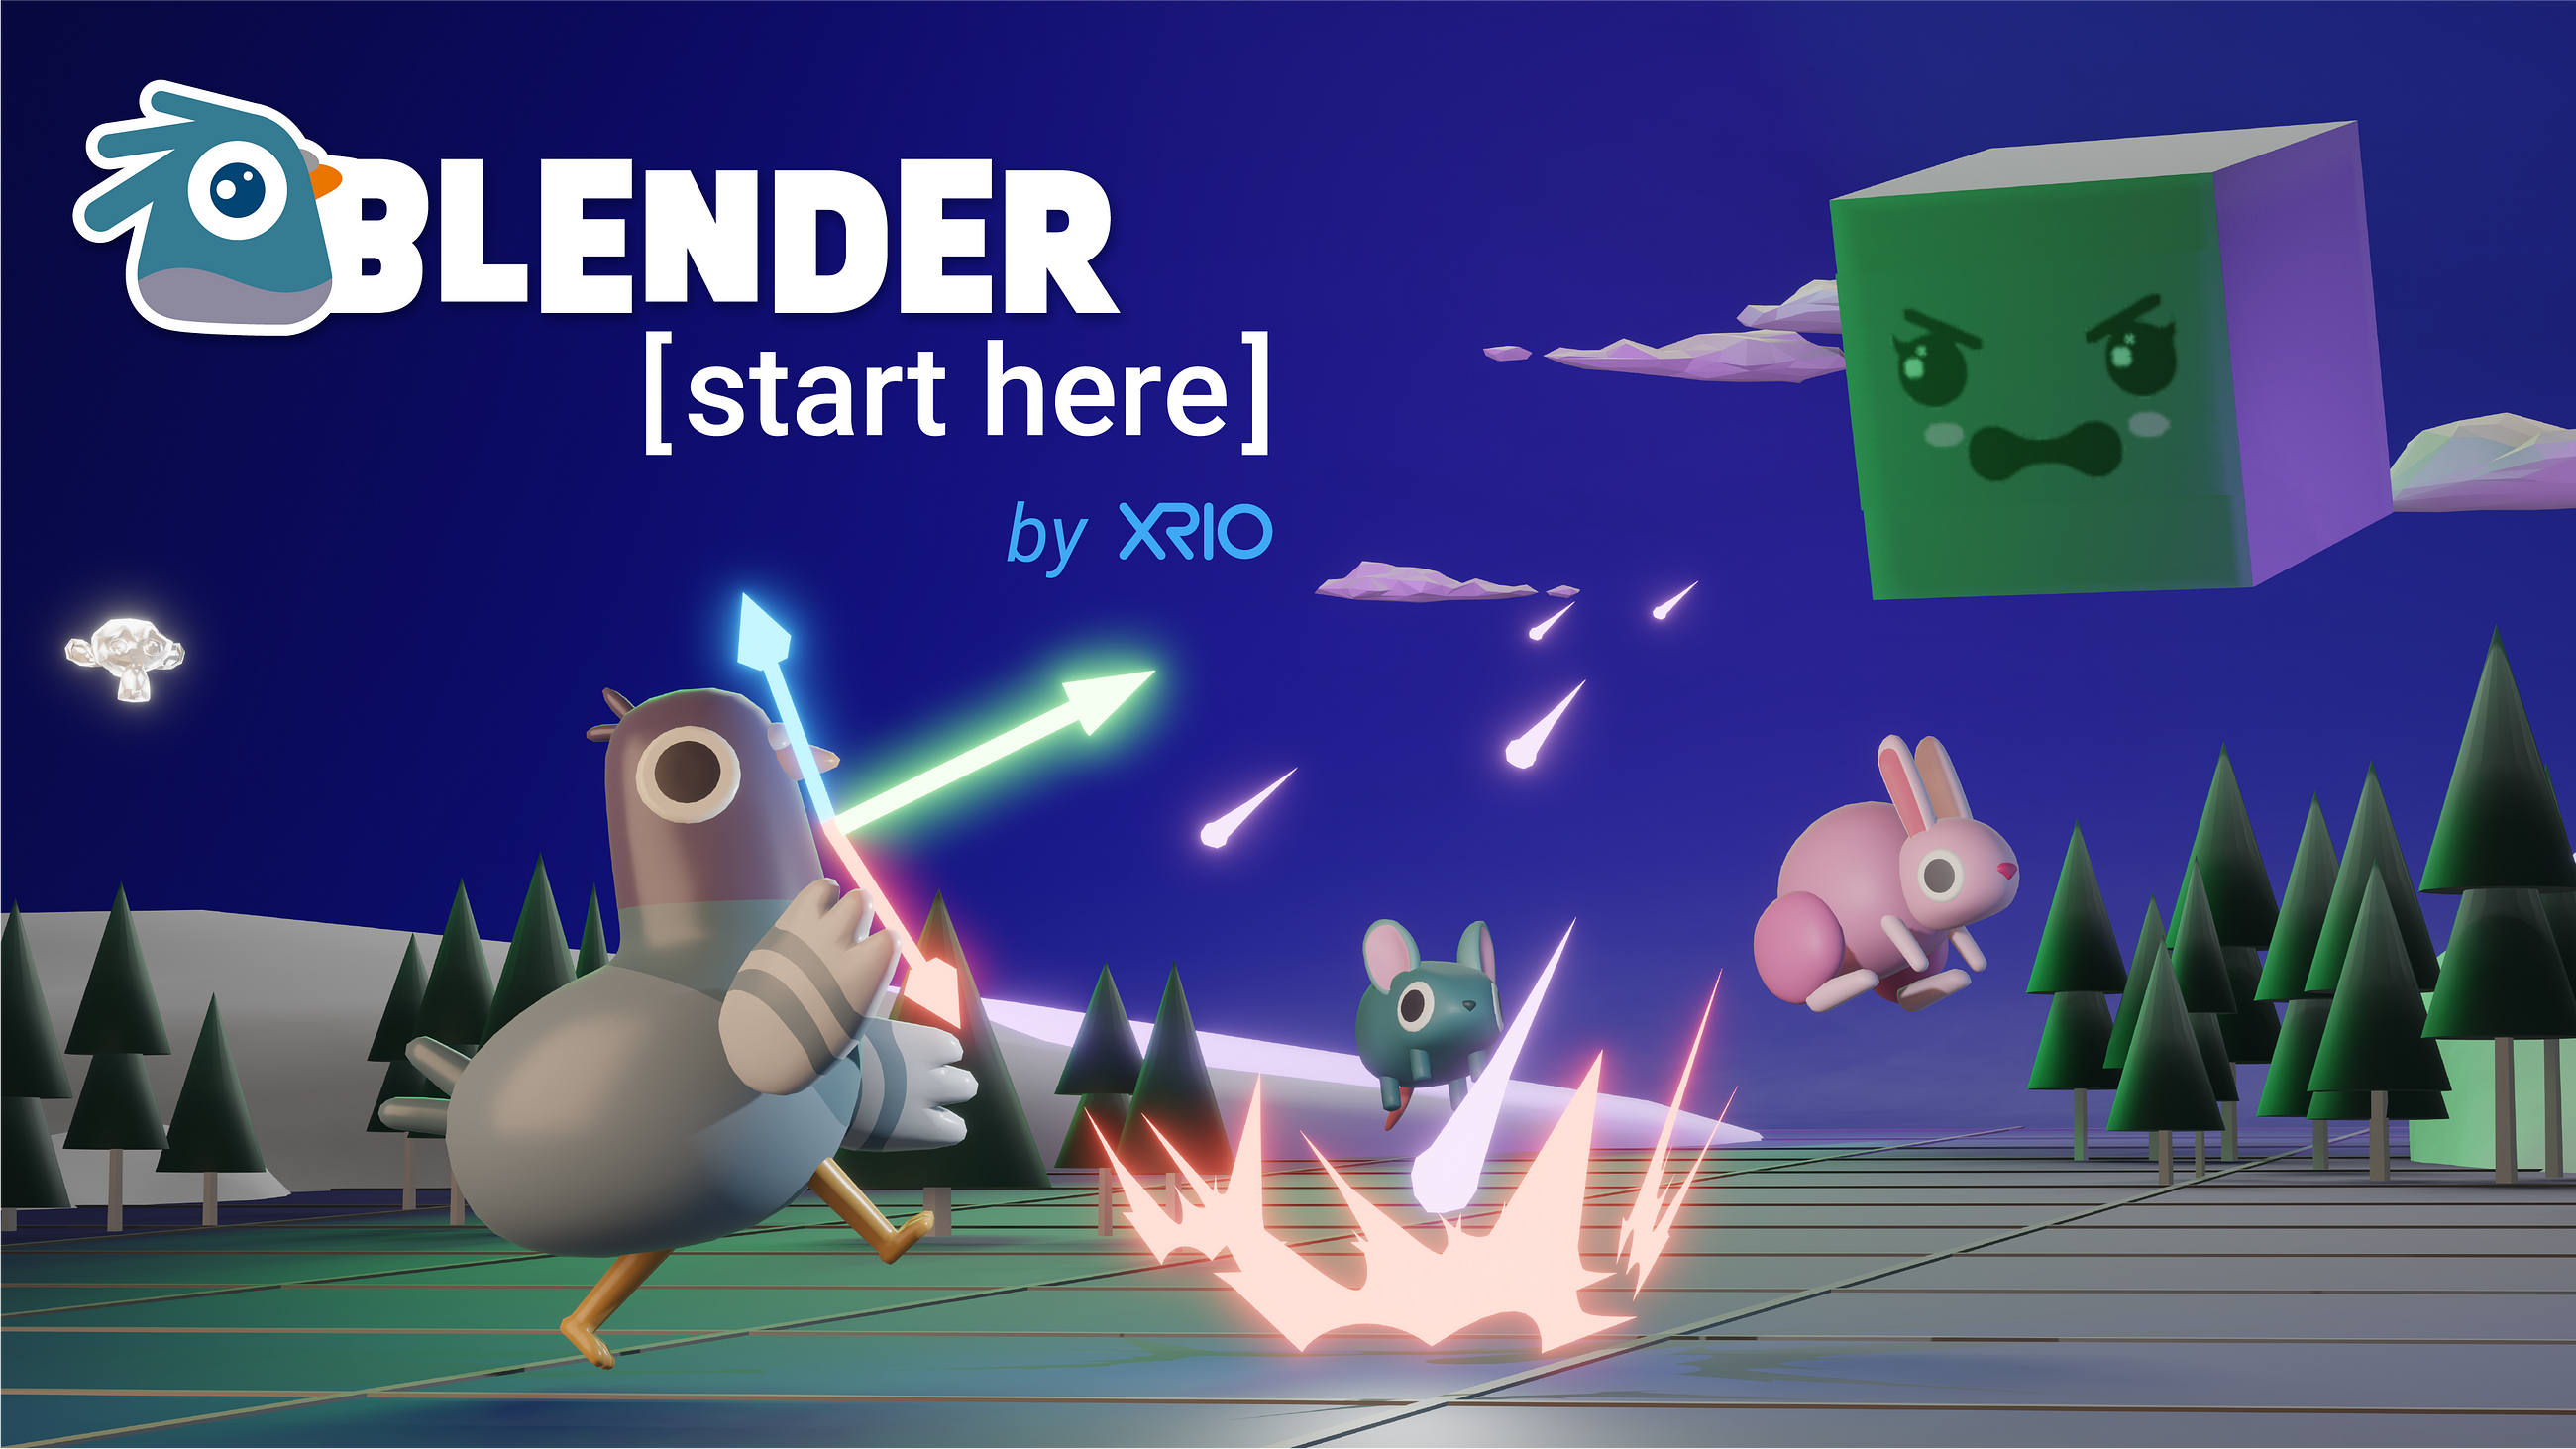 Blender Start Here: Gamifying an unapproachable UI